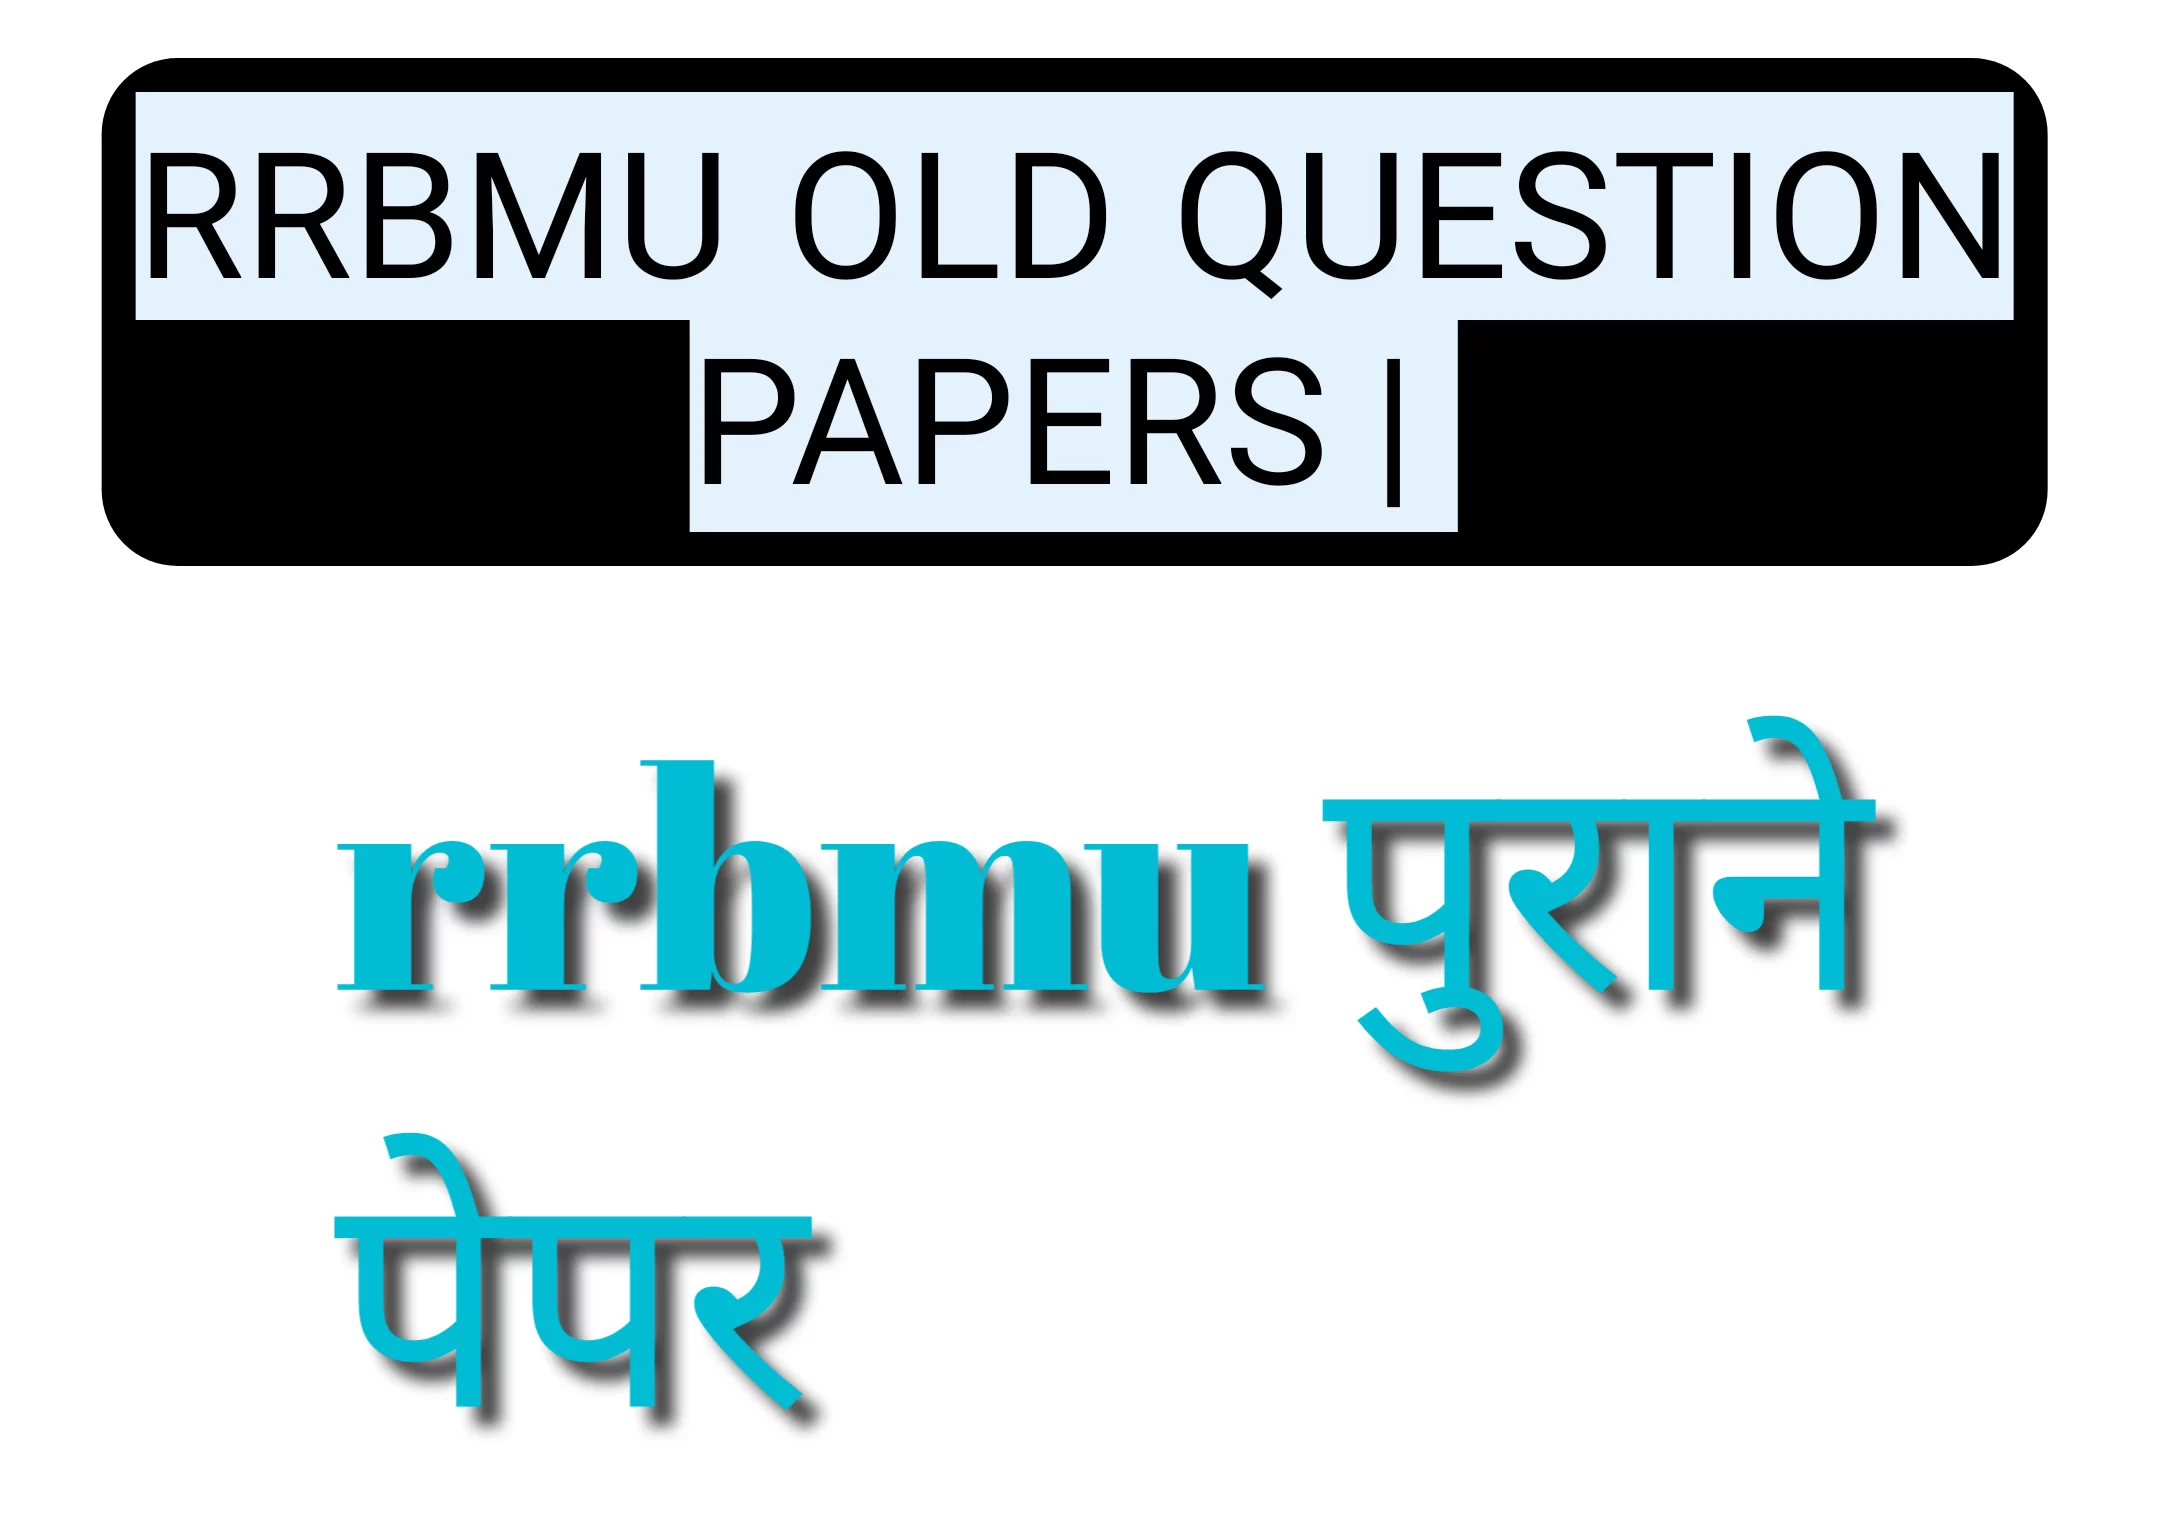 RRBMU OLD QUESTION PAPERS | rrbmu पुराने पेपर | old papers pdf download rrbmu